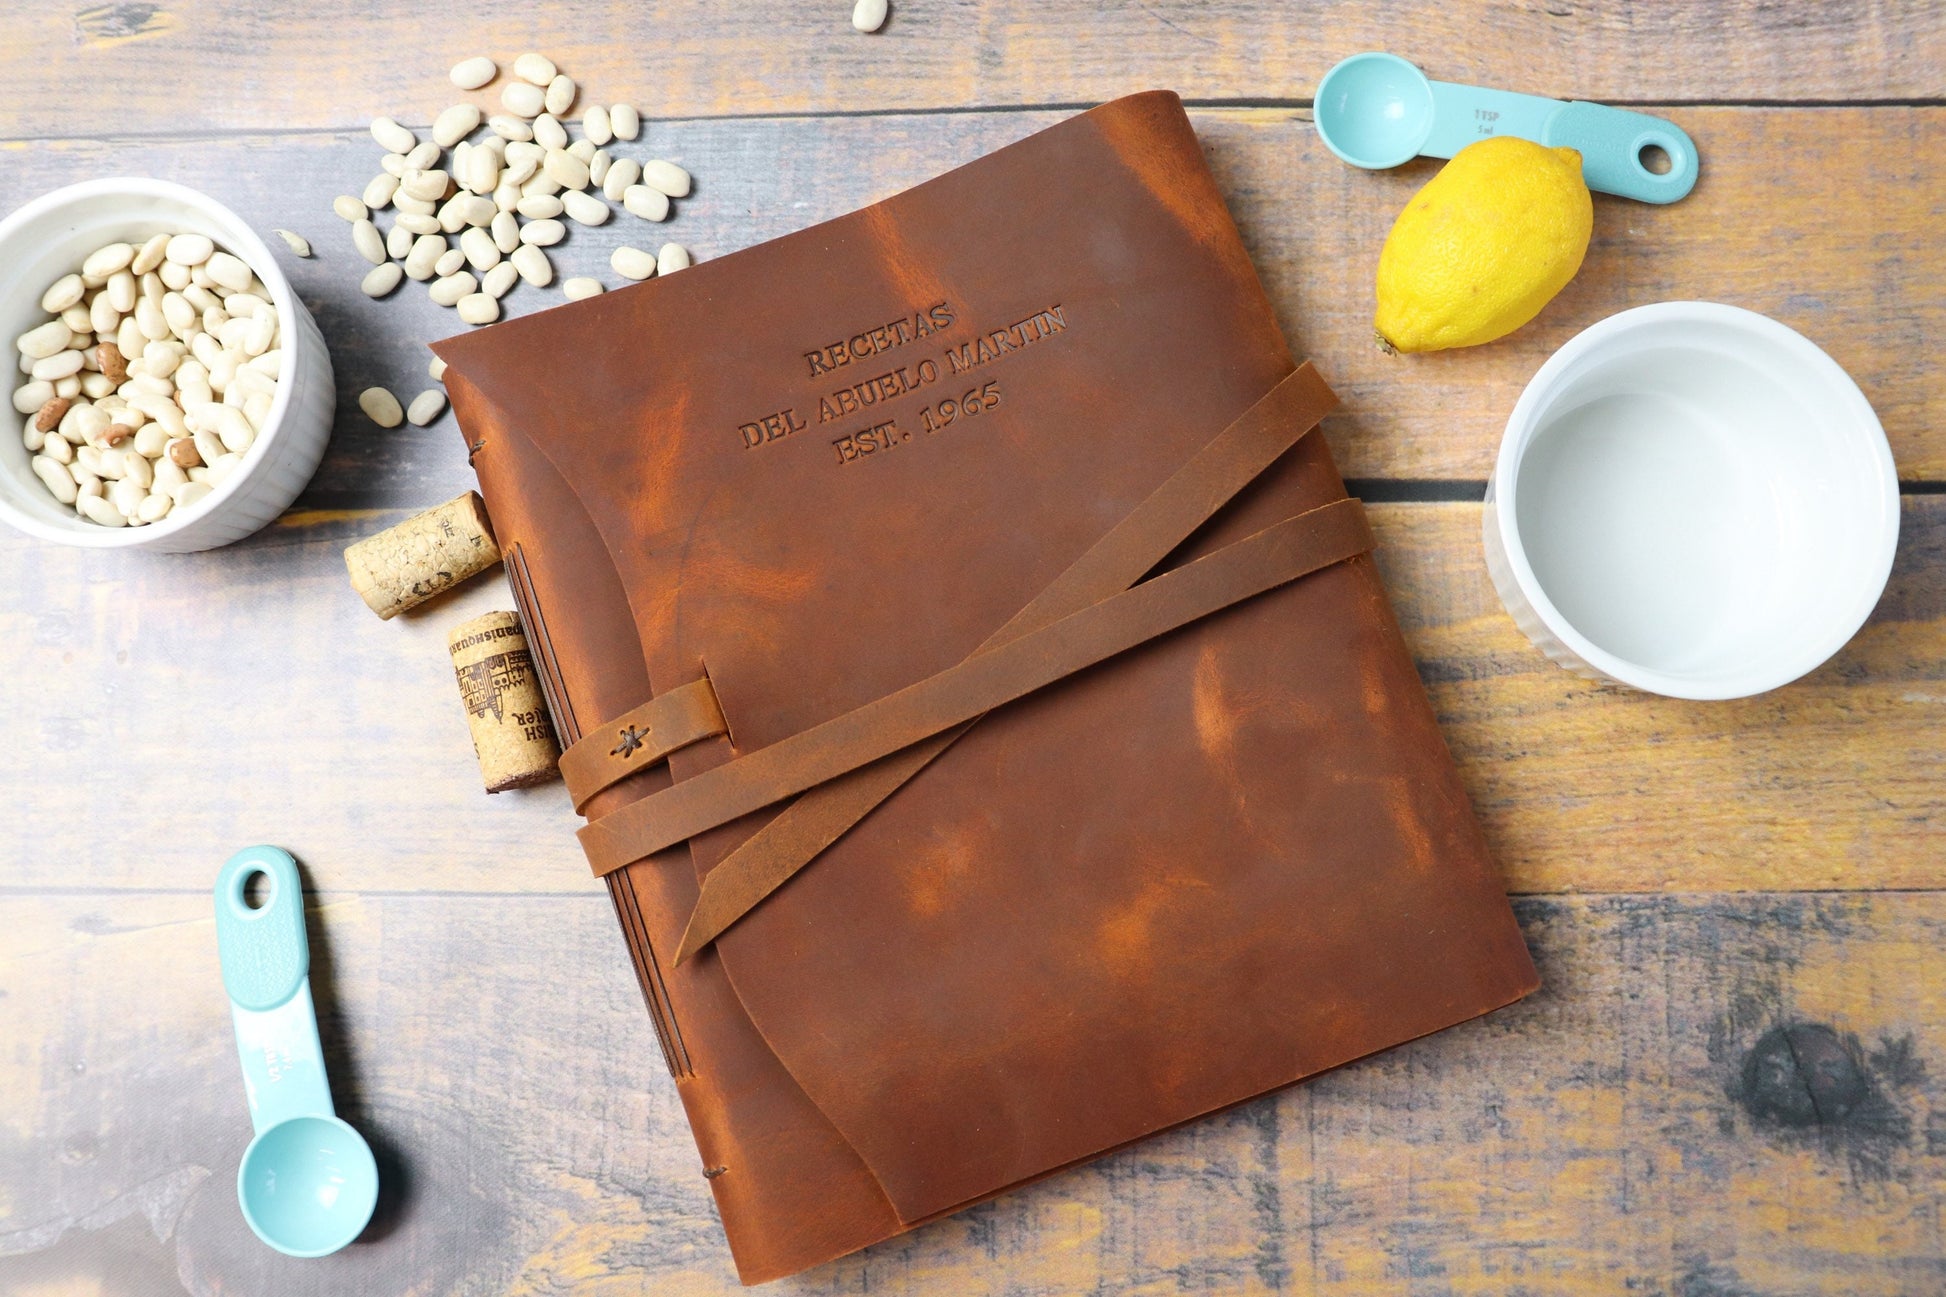 Heirloom Leather Recipe Journal, Family Cookbook, Sewn Bound Full Grain Leather, Personalized Gift for Chefs, Cooks, Bakers, Mom, or Grandma